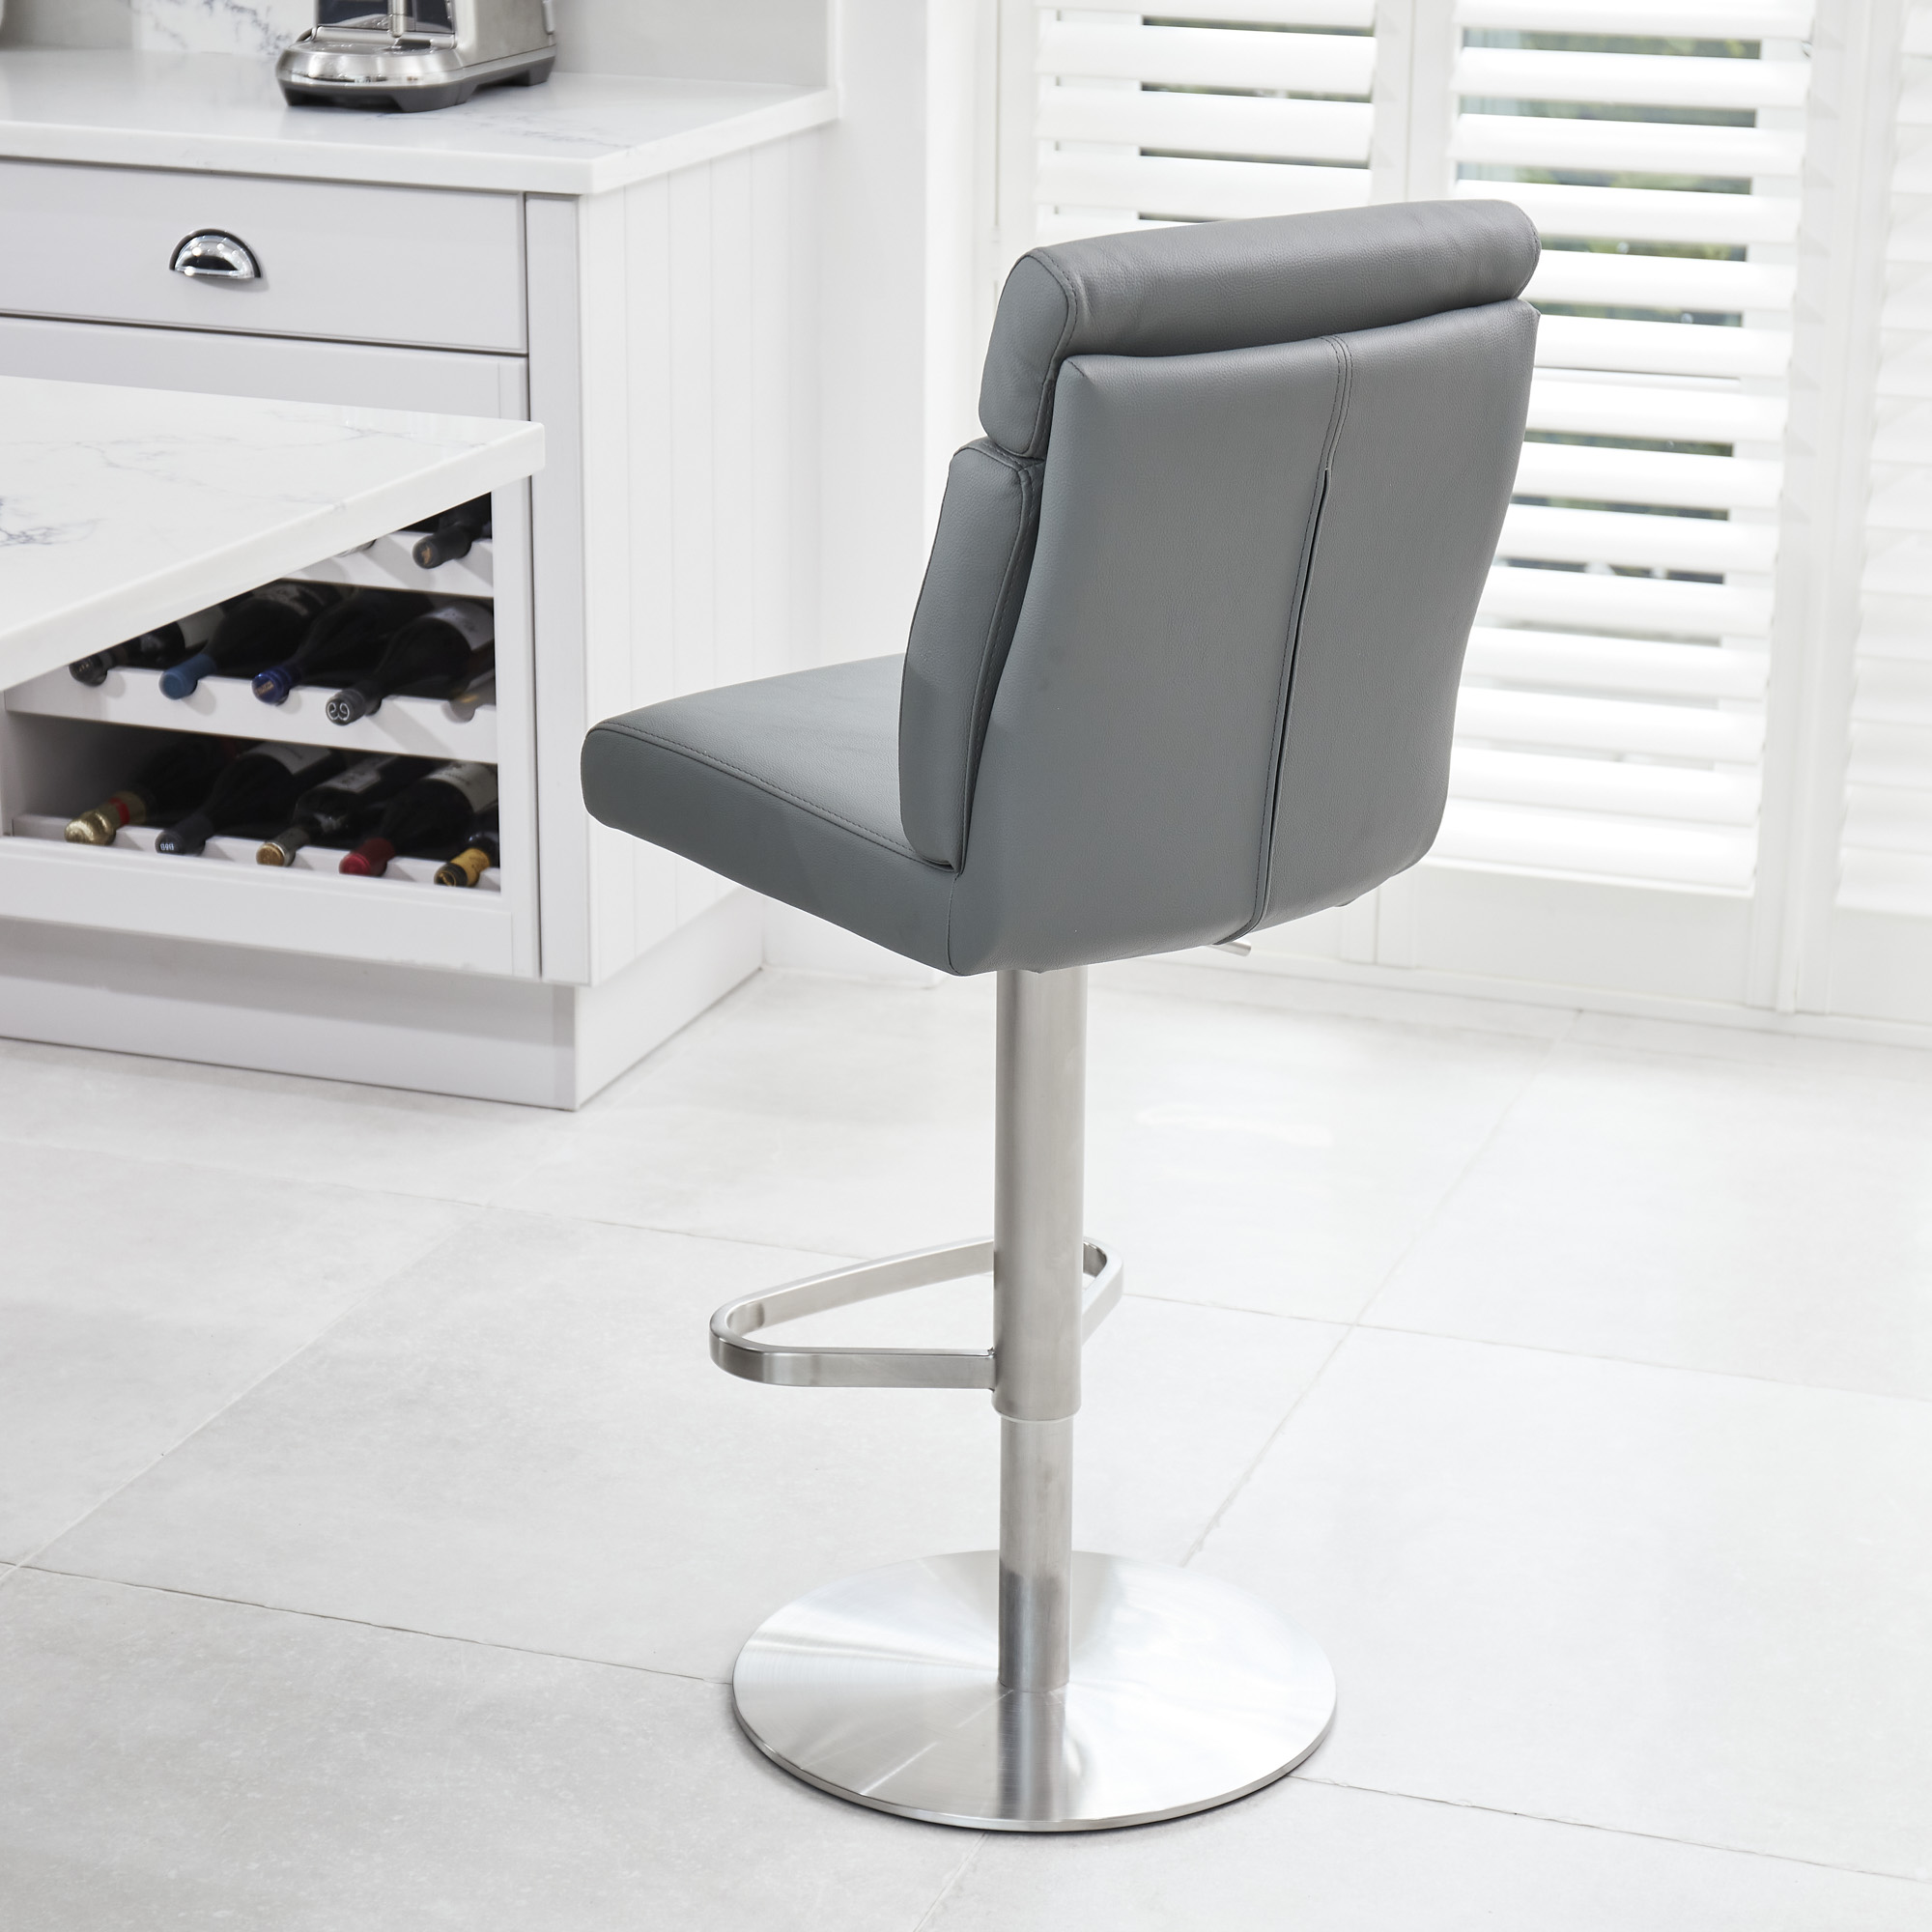 Portland Brushed Steel Gas Lift Kitchen Stool in Grey Faux Leather